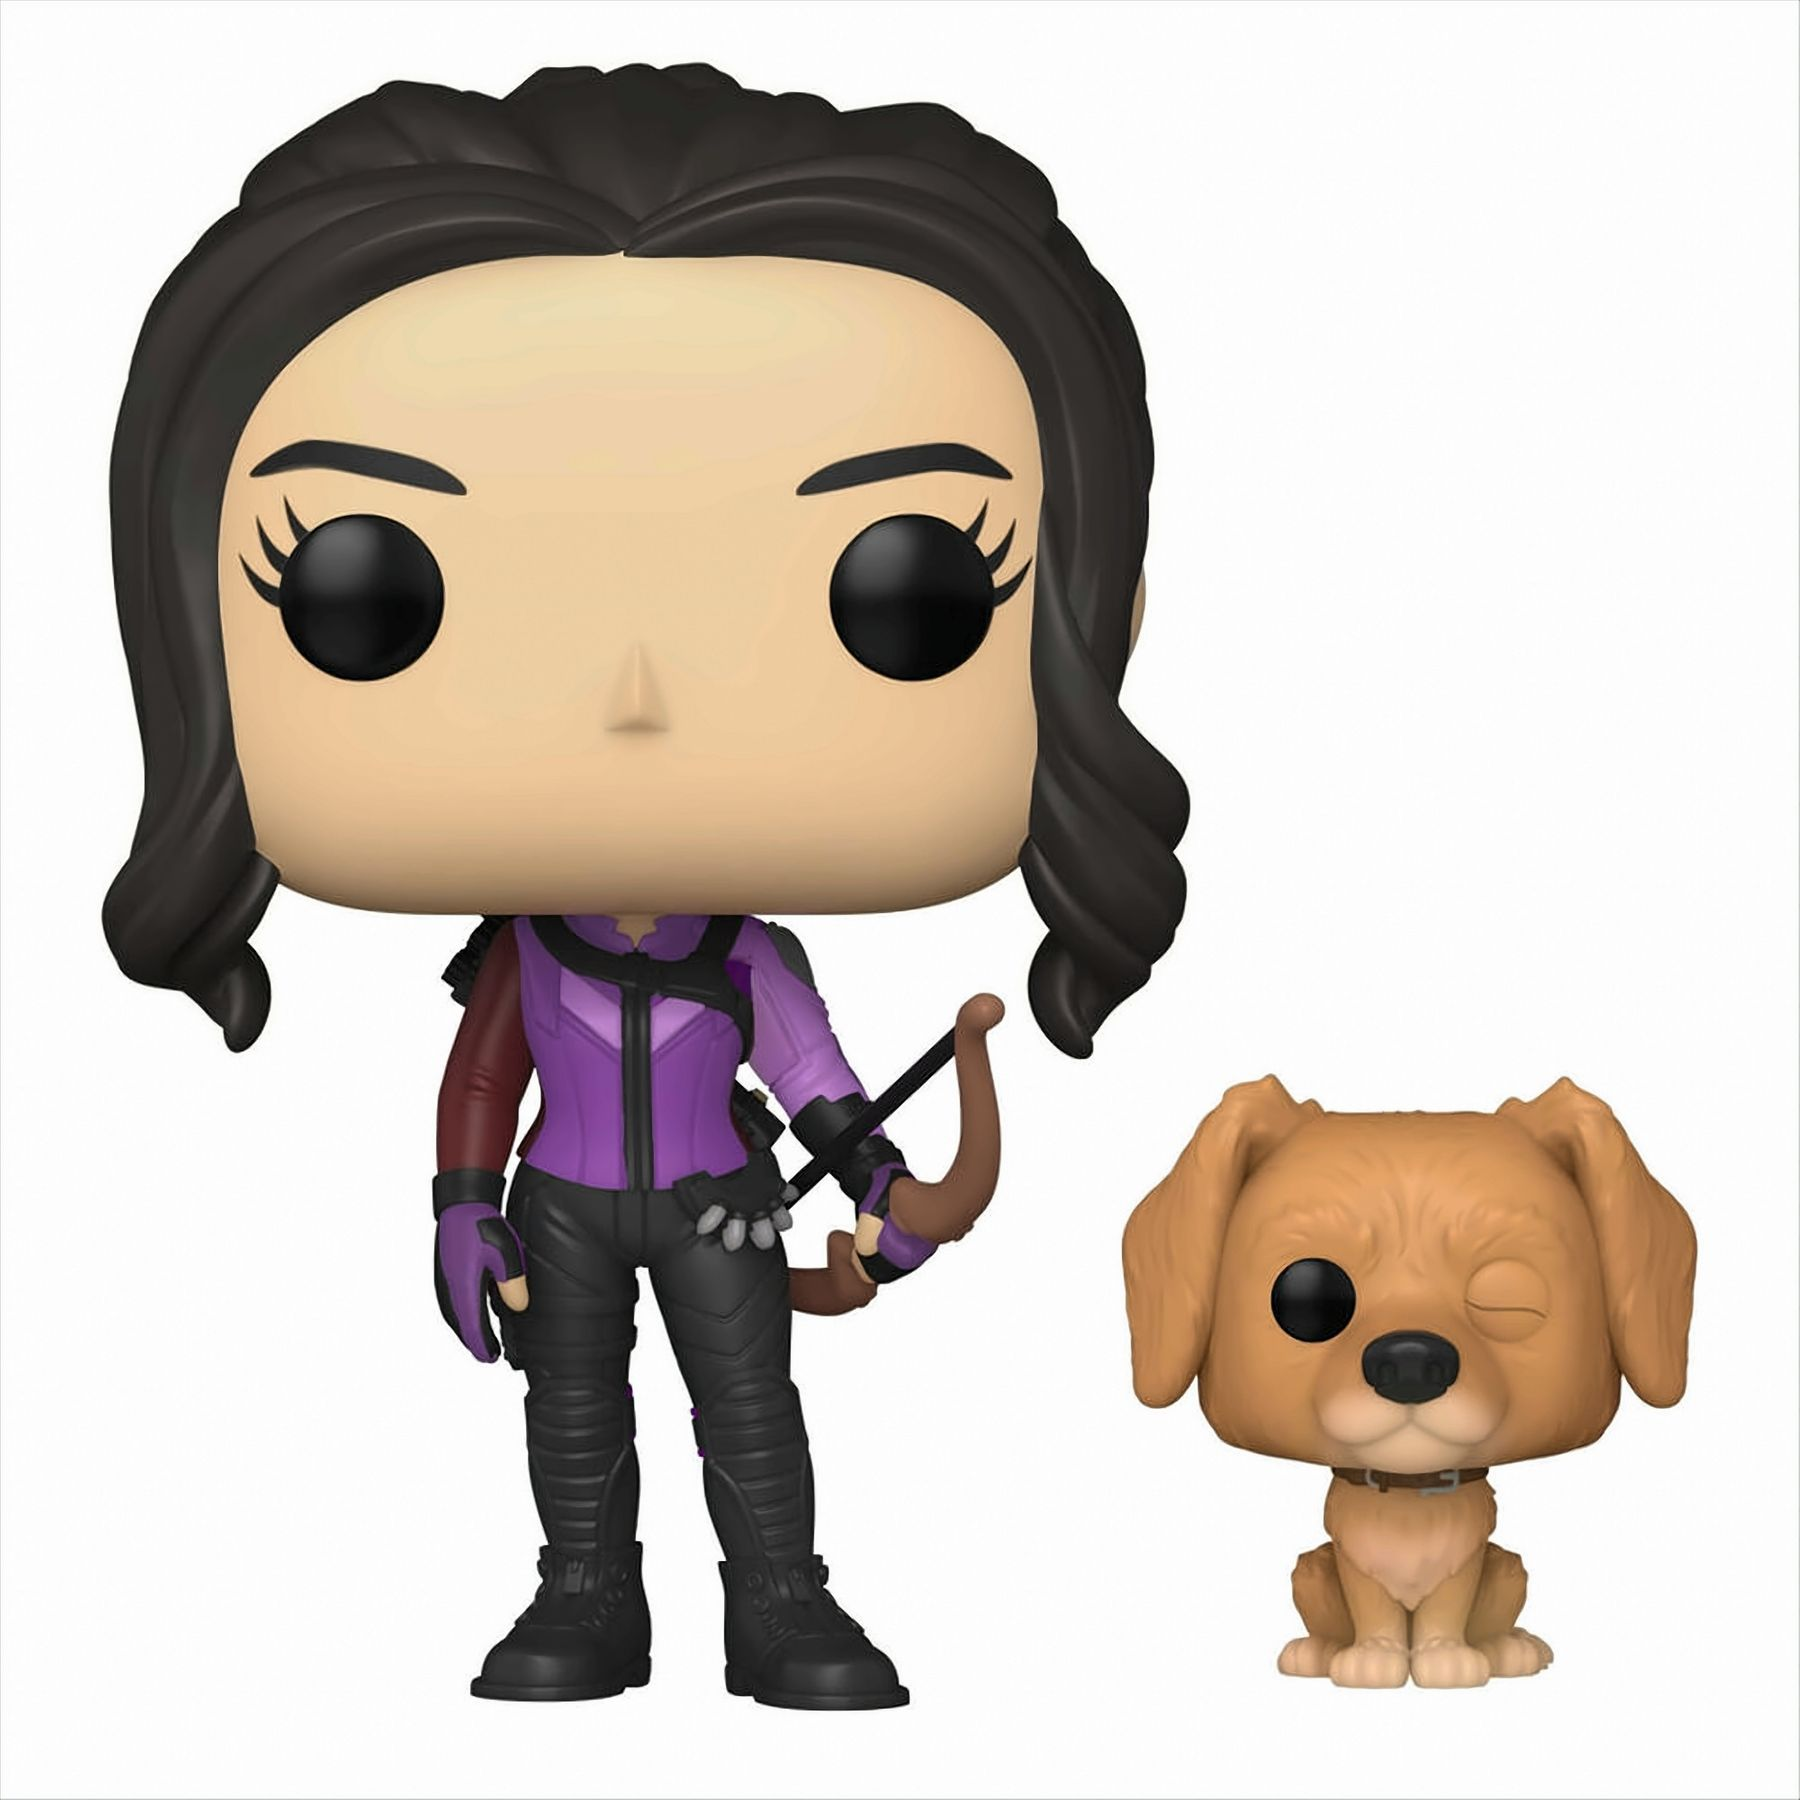 Bishop - - the Lucky Kate Hawkeye POP w. Pizza Dog